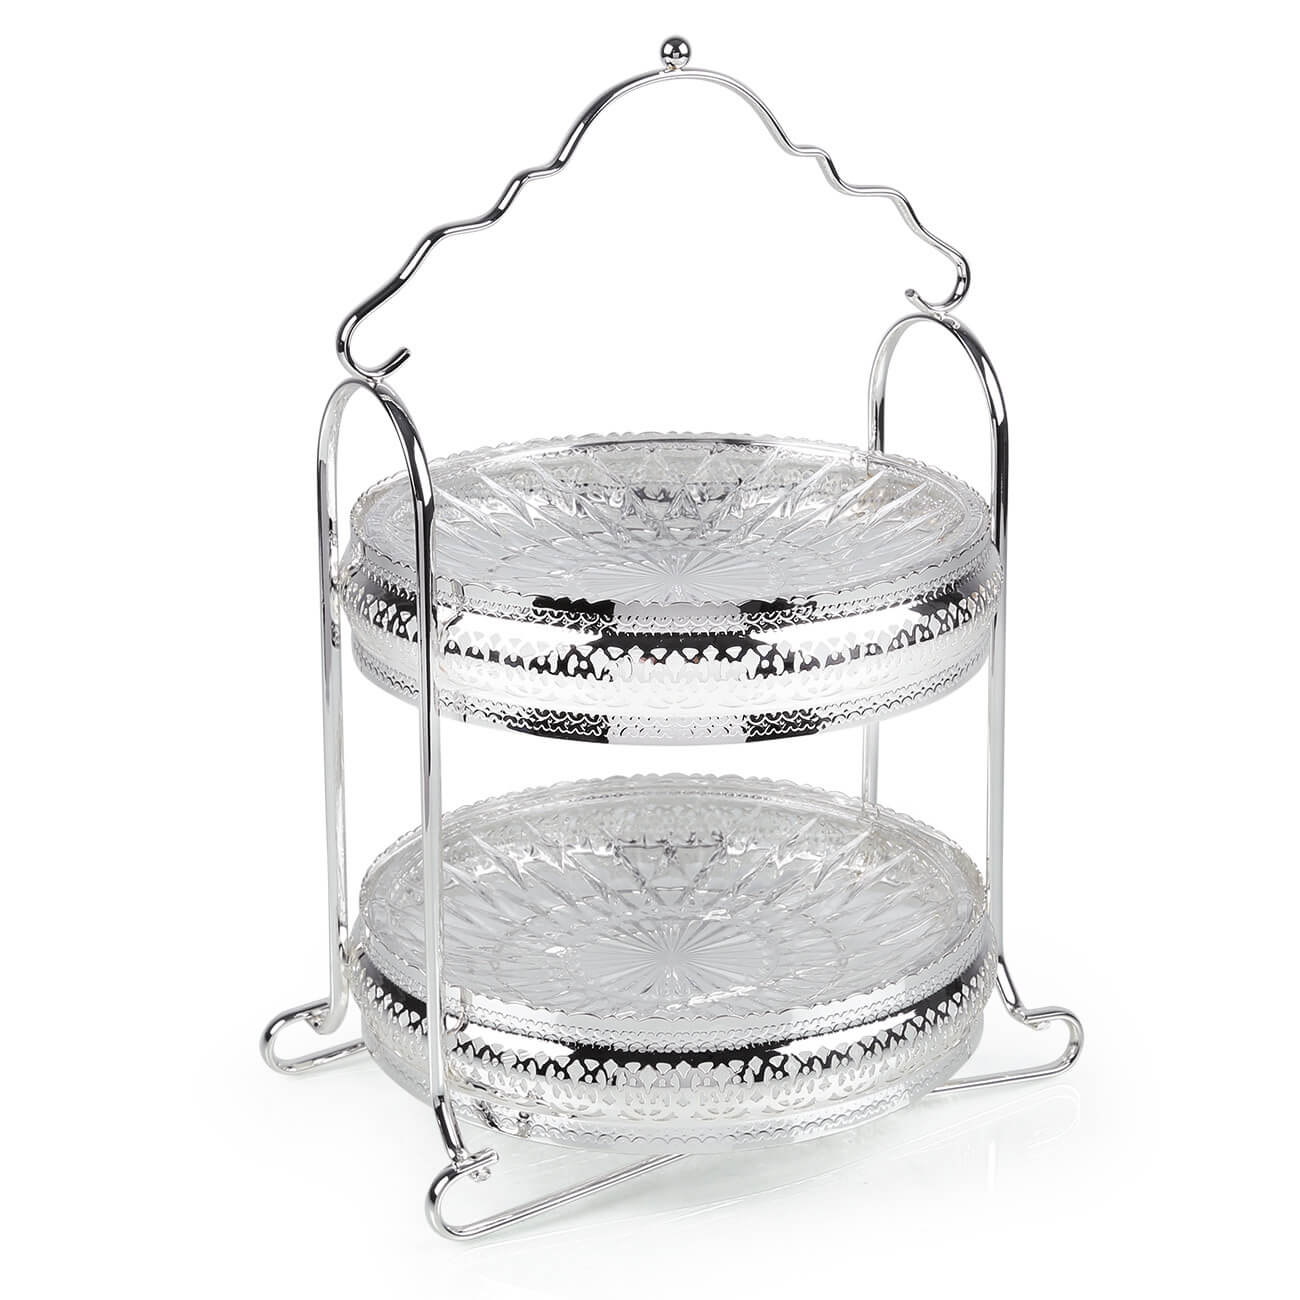 Cake stand, 20x20 / 33 cm, 2 tiers, glass / metal, Brittany изображение № 1